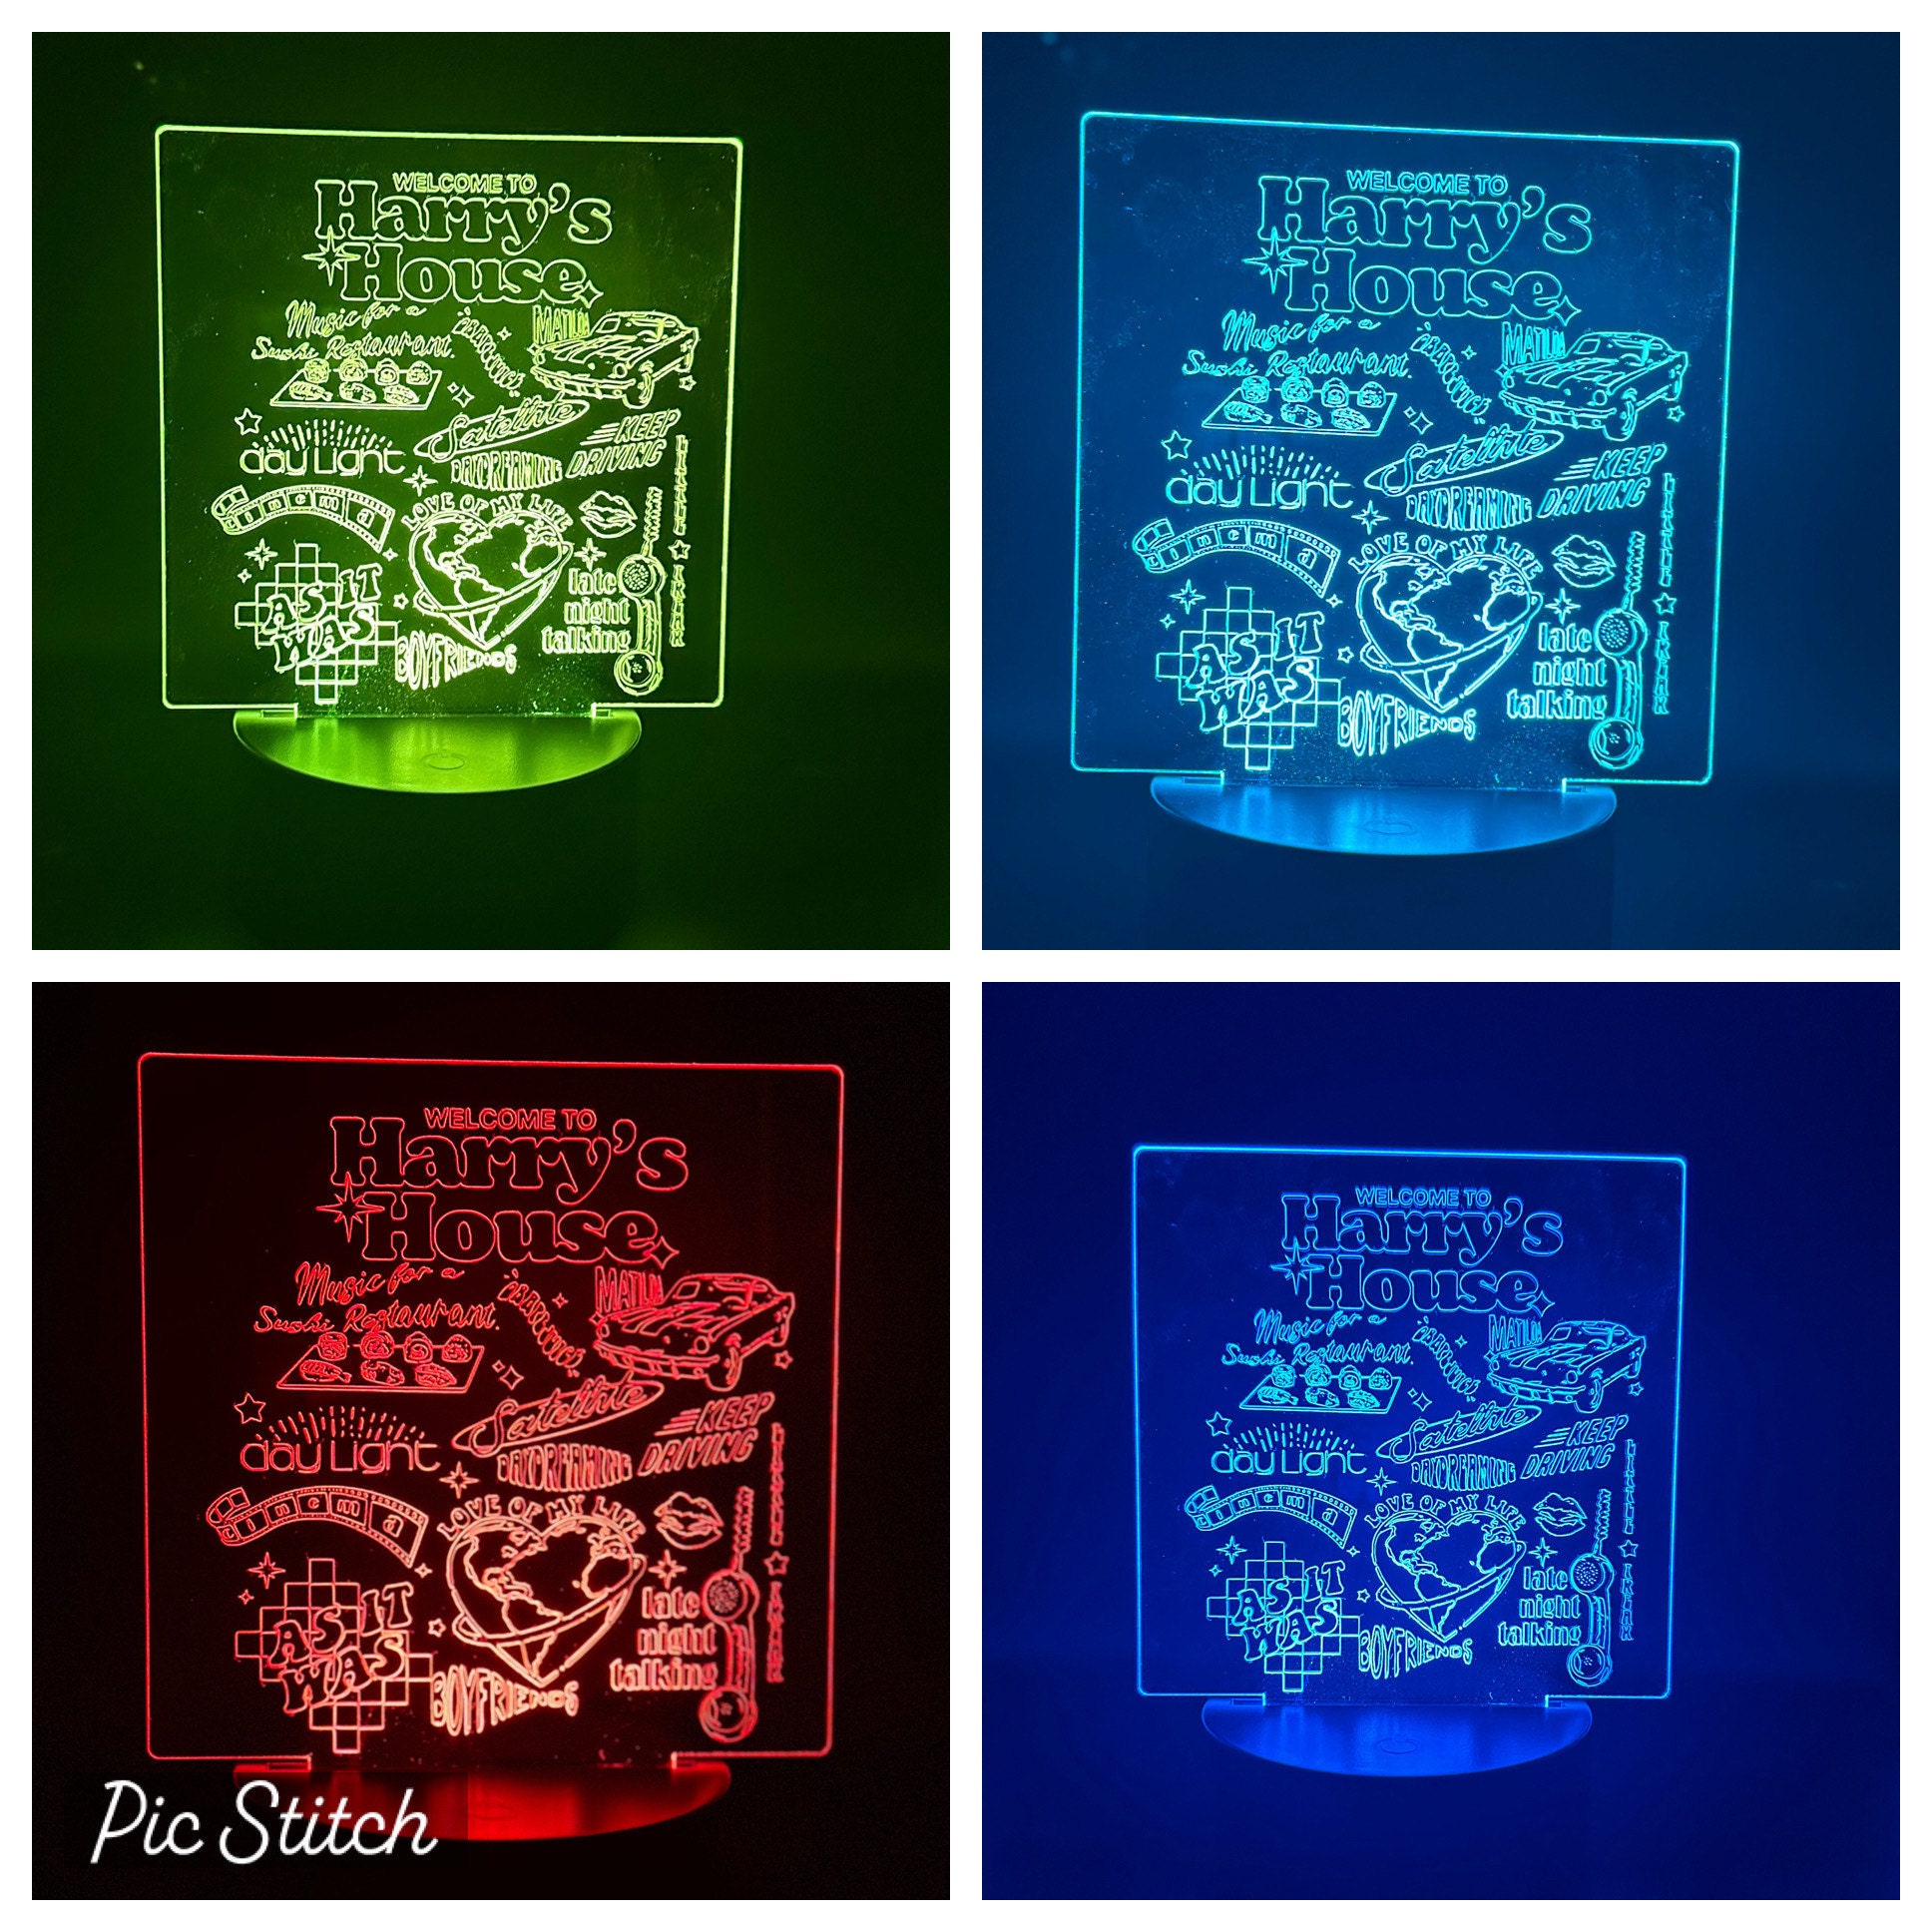 Taylor Swift, Accents, Taylor Swift Illusion Night Light Led Acrylic Has  6 Color Changing